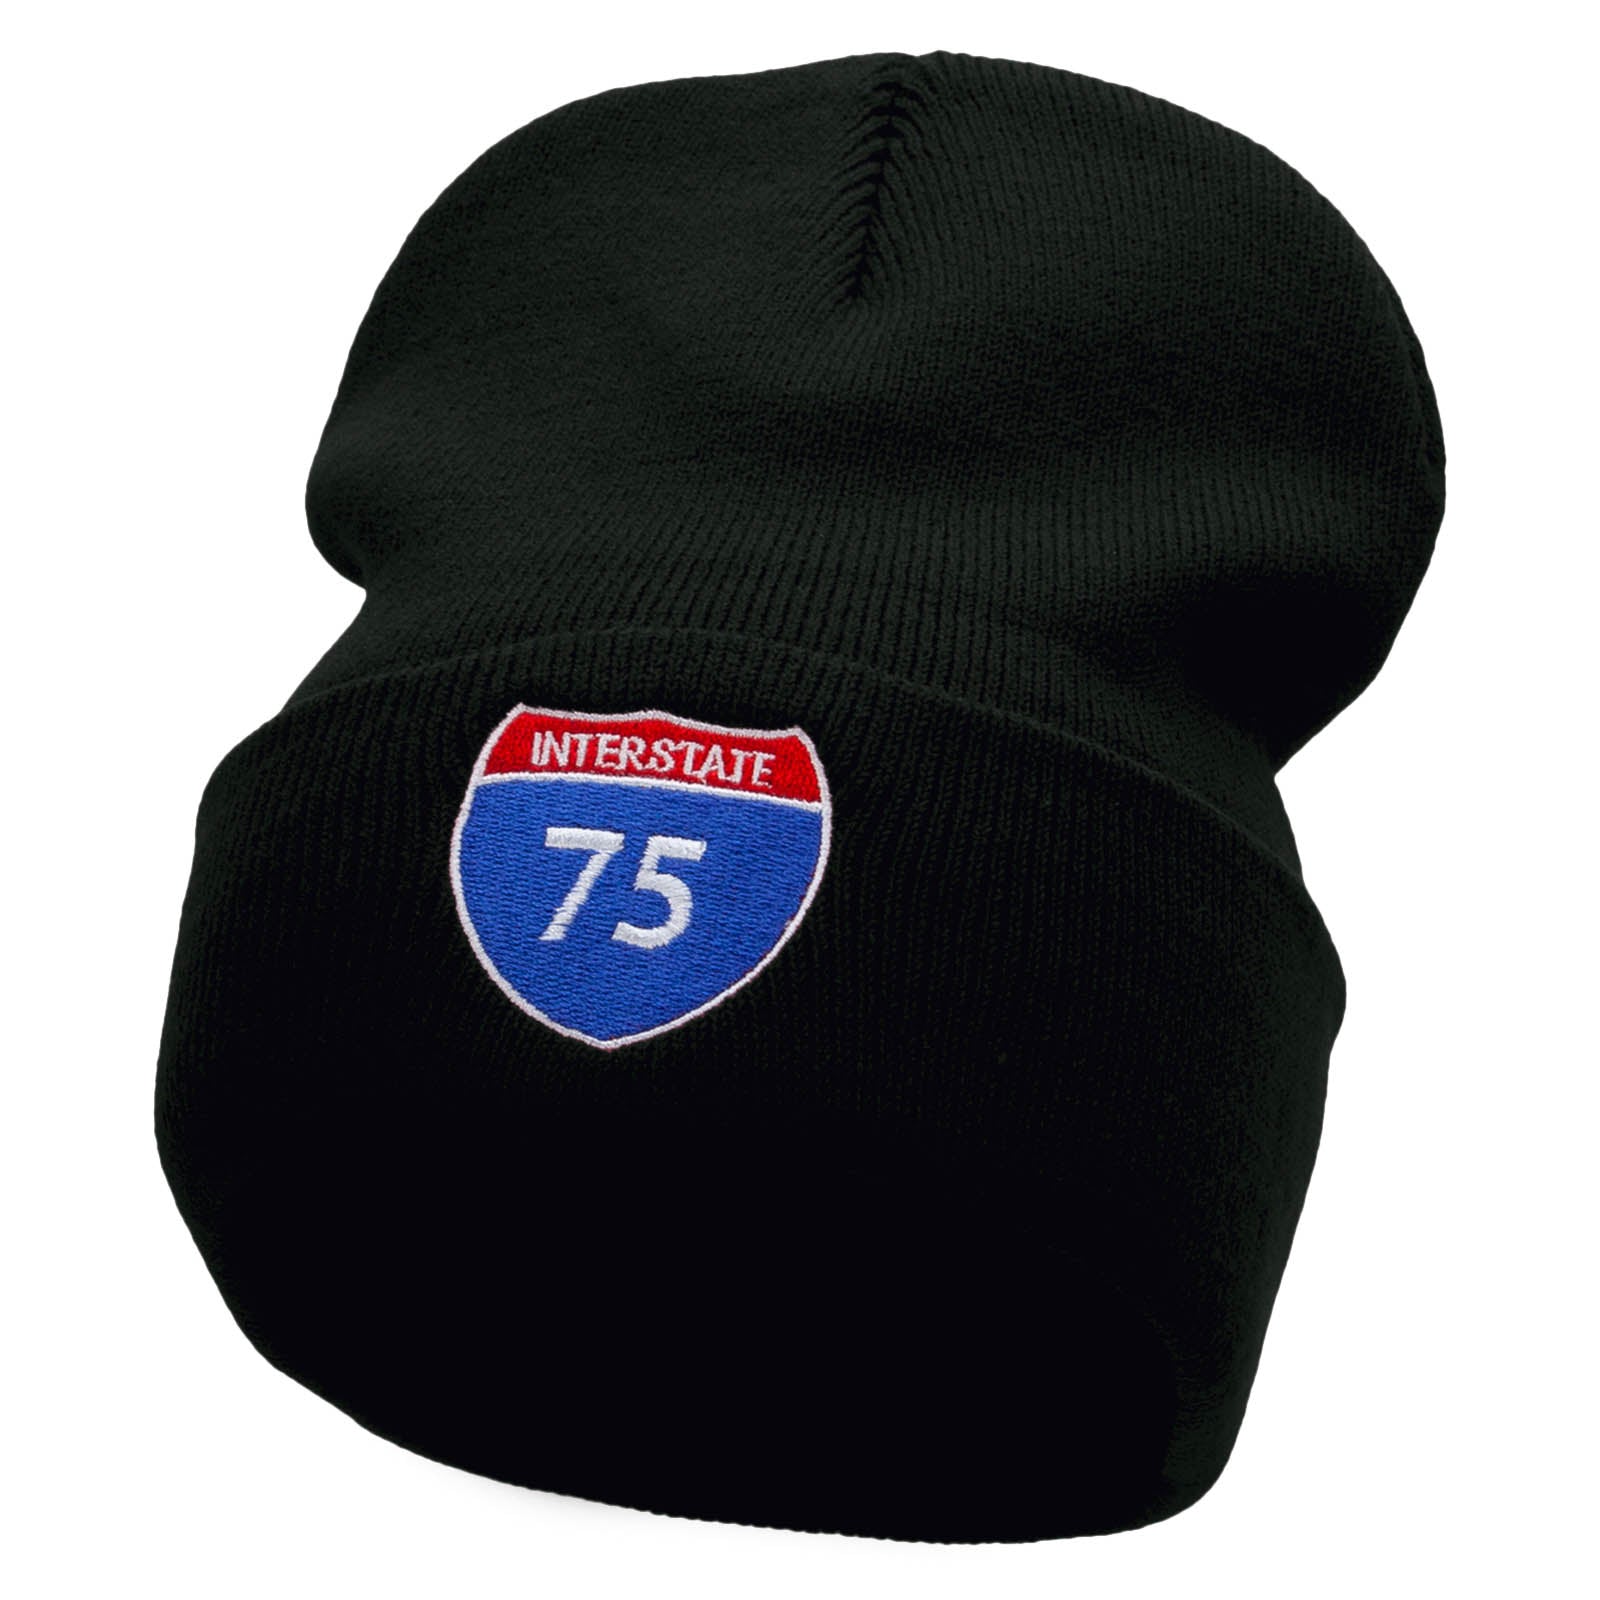 Interstate Highway 75 Sign Embroidered 12 Inch Long Knitted Beanie - Black OSFM